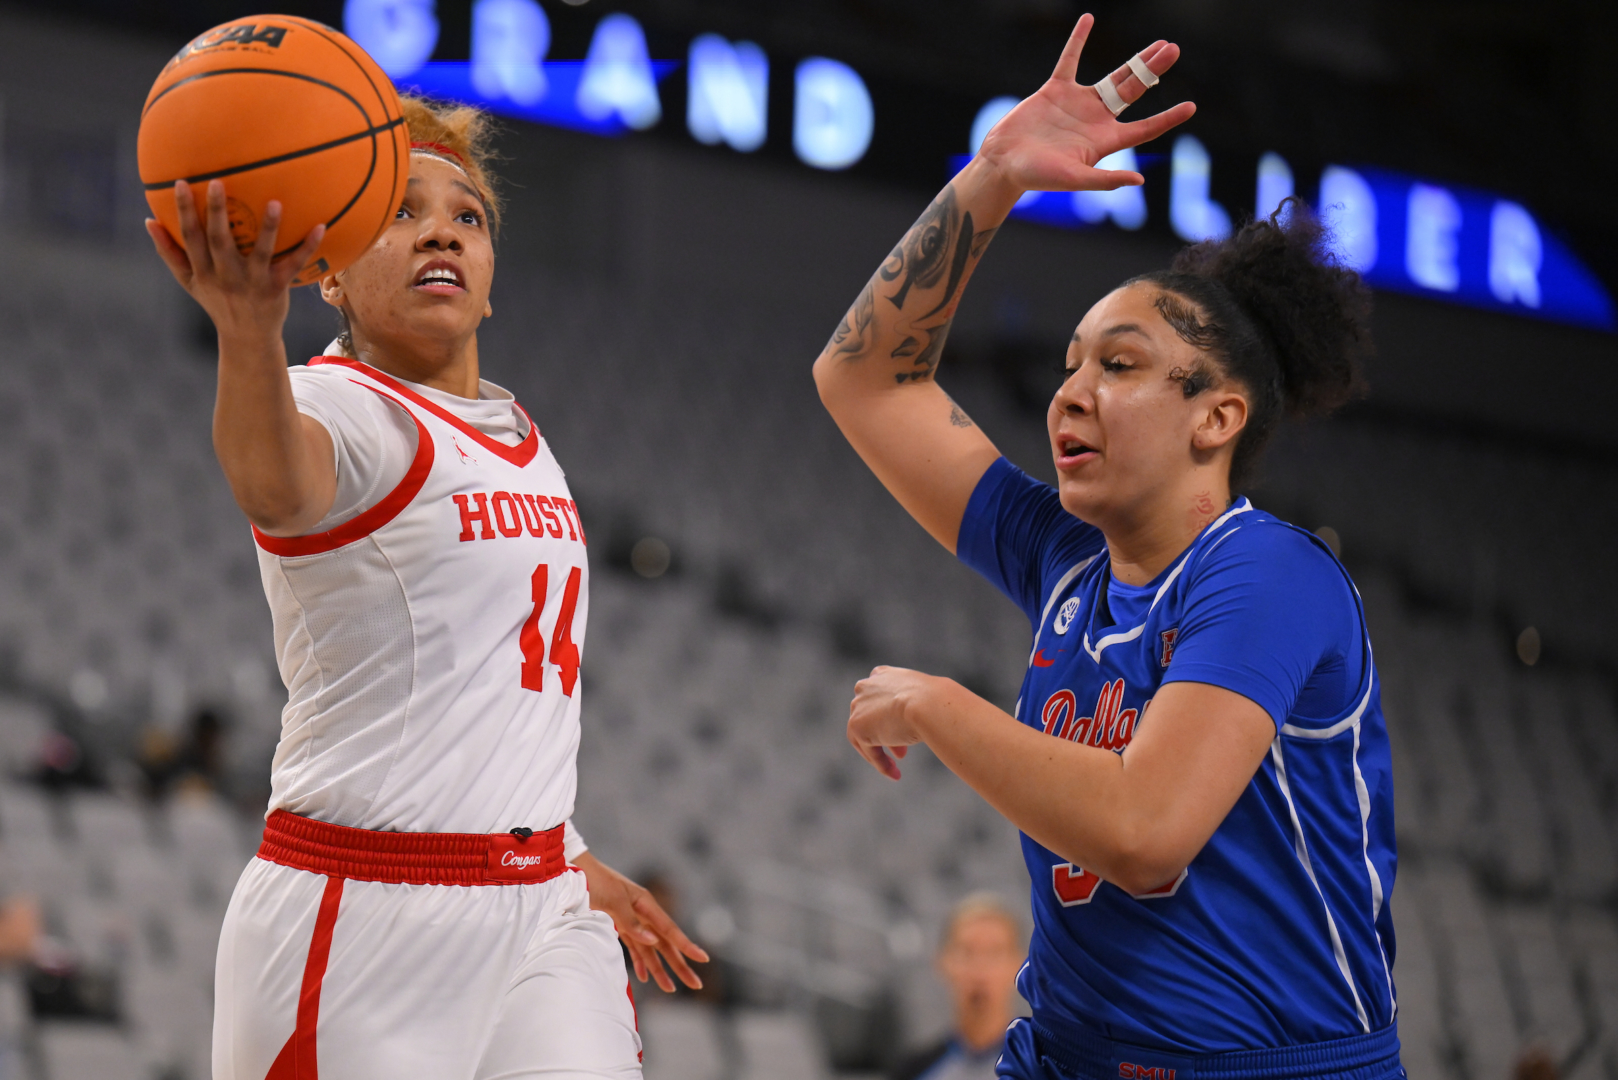 Laila Blair scored 12 points in UH women's baketball's win over SMU in the quarterfinals of the AAC Tournament. | Courtesy of Andy Hancock/AAC